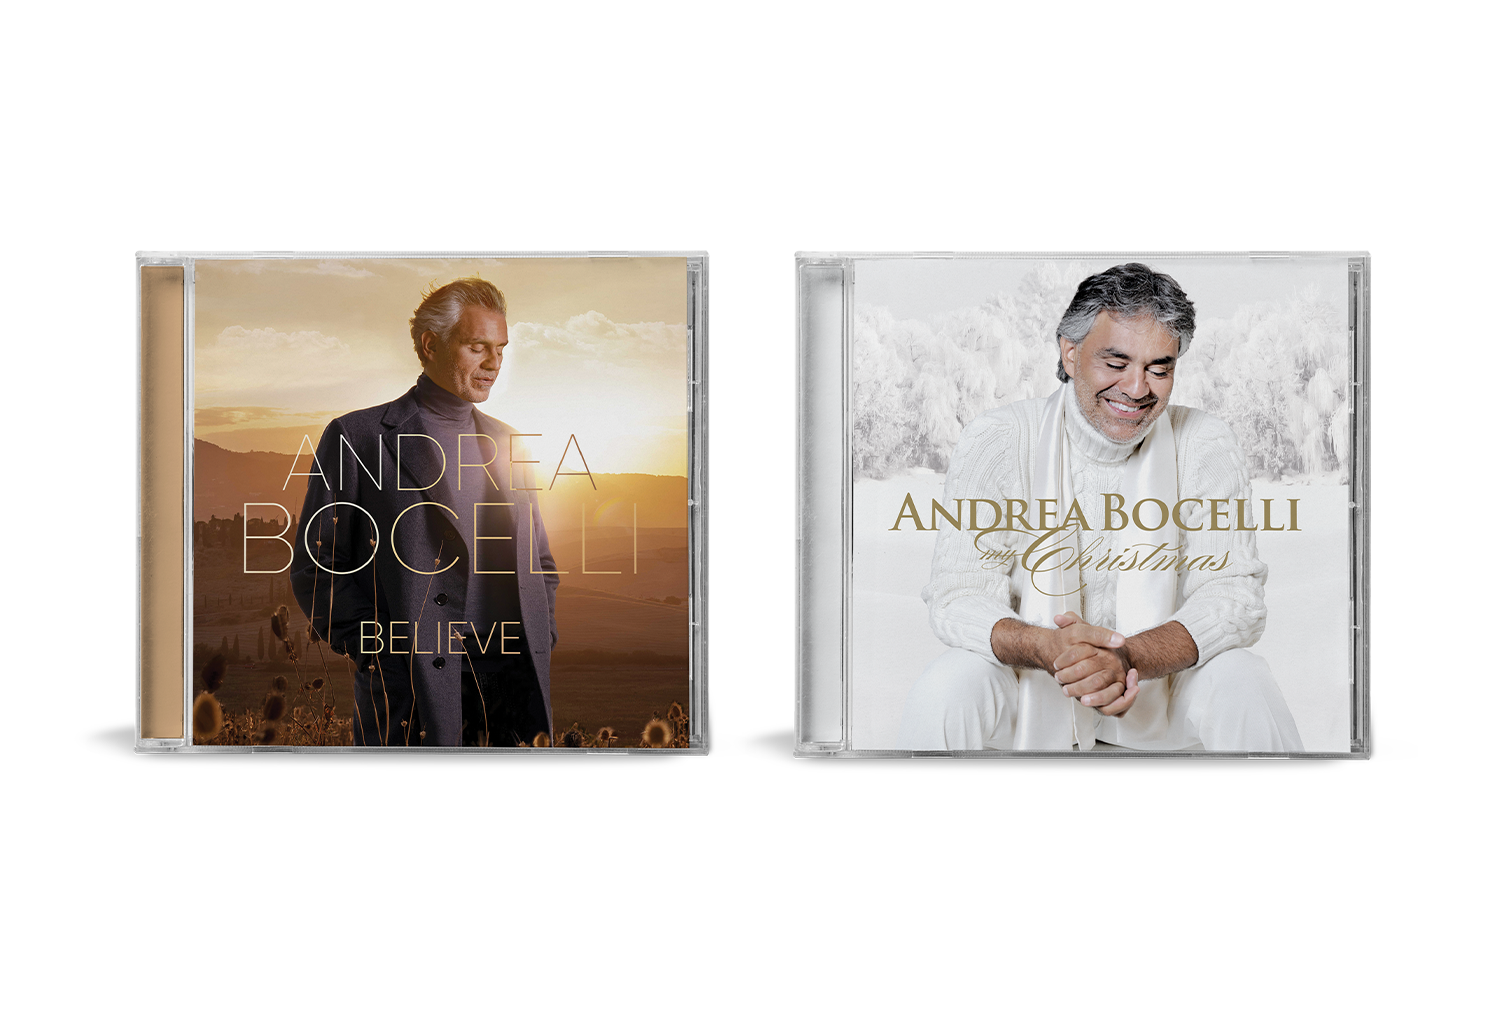 My Christmas & Believe CDs by Andrea Bocelli on TBN